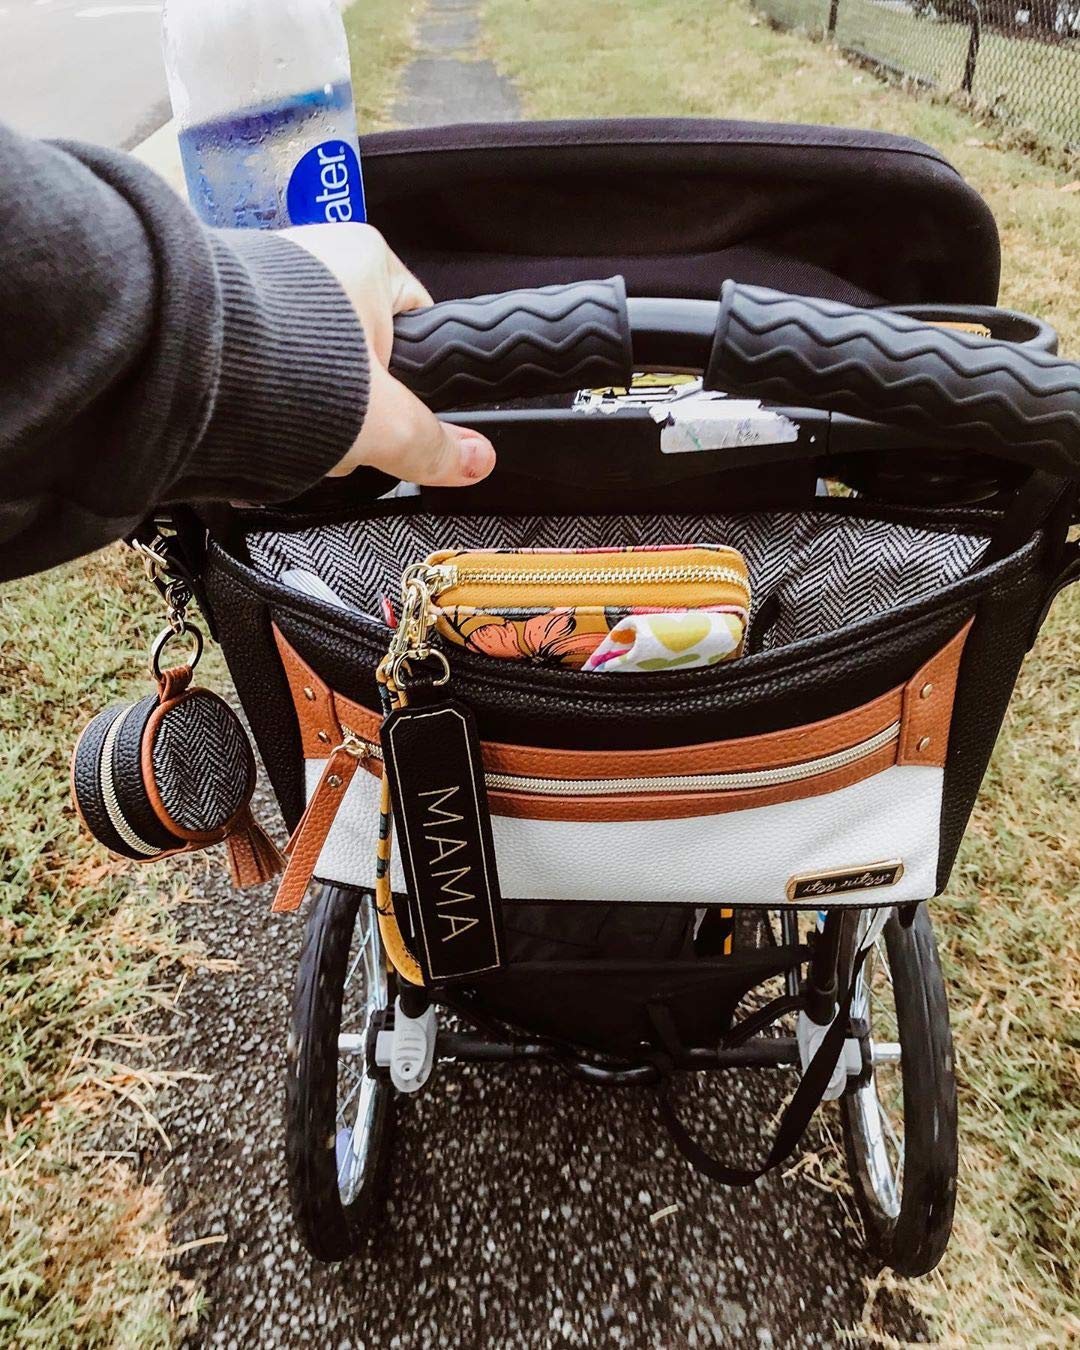 Itzy Ritzy Adjustable Stroller Caddy / Organizer Featuring Two Built-in Front Zippered Pocket and Adjustable Straps to Fit Nearly Any Stroller, Coffee and Cream